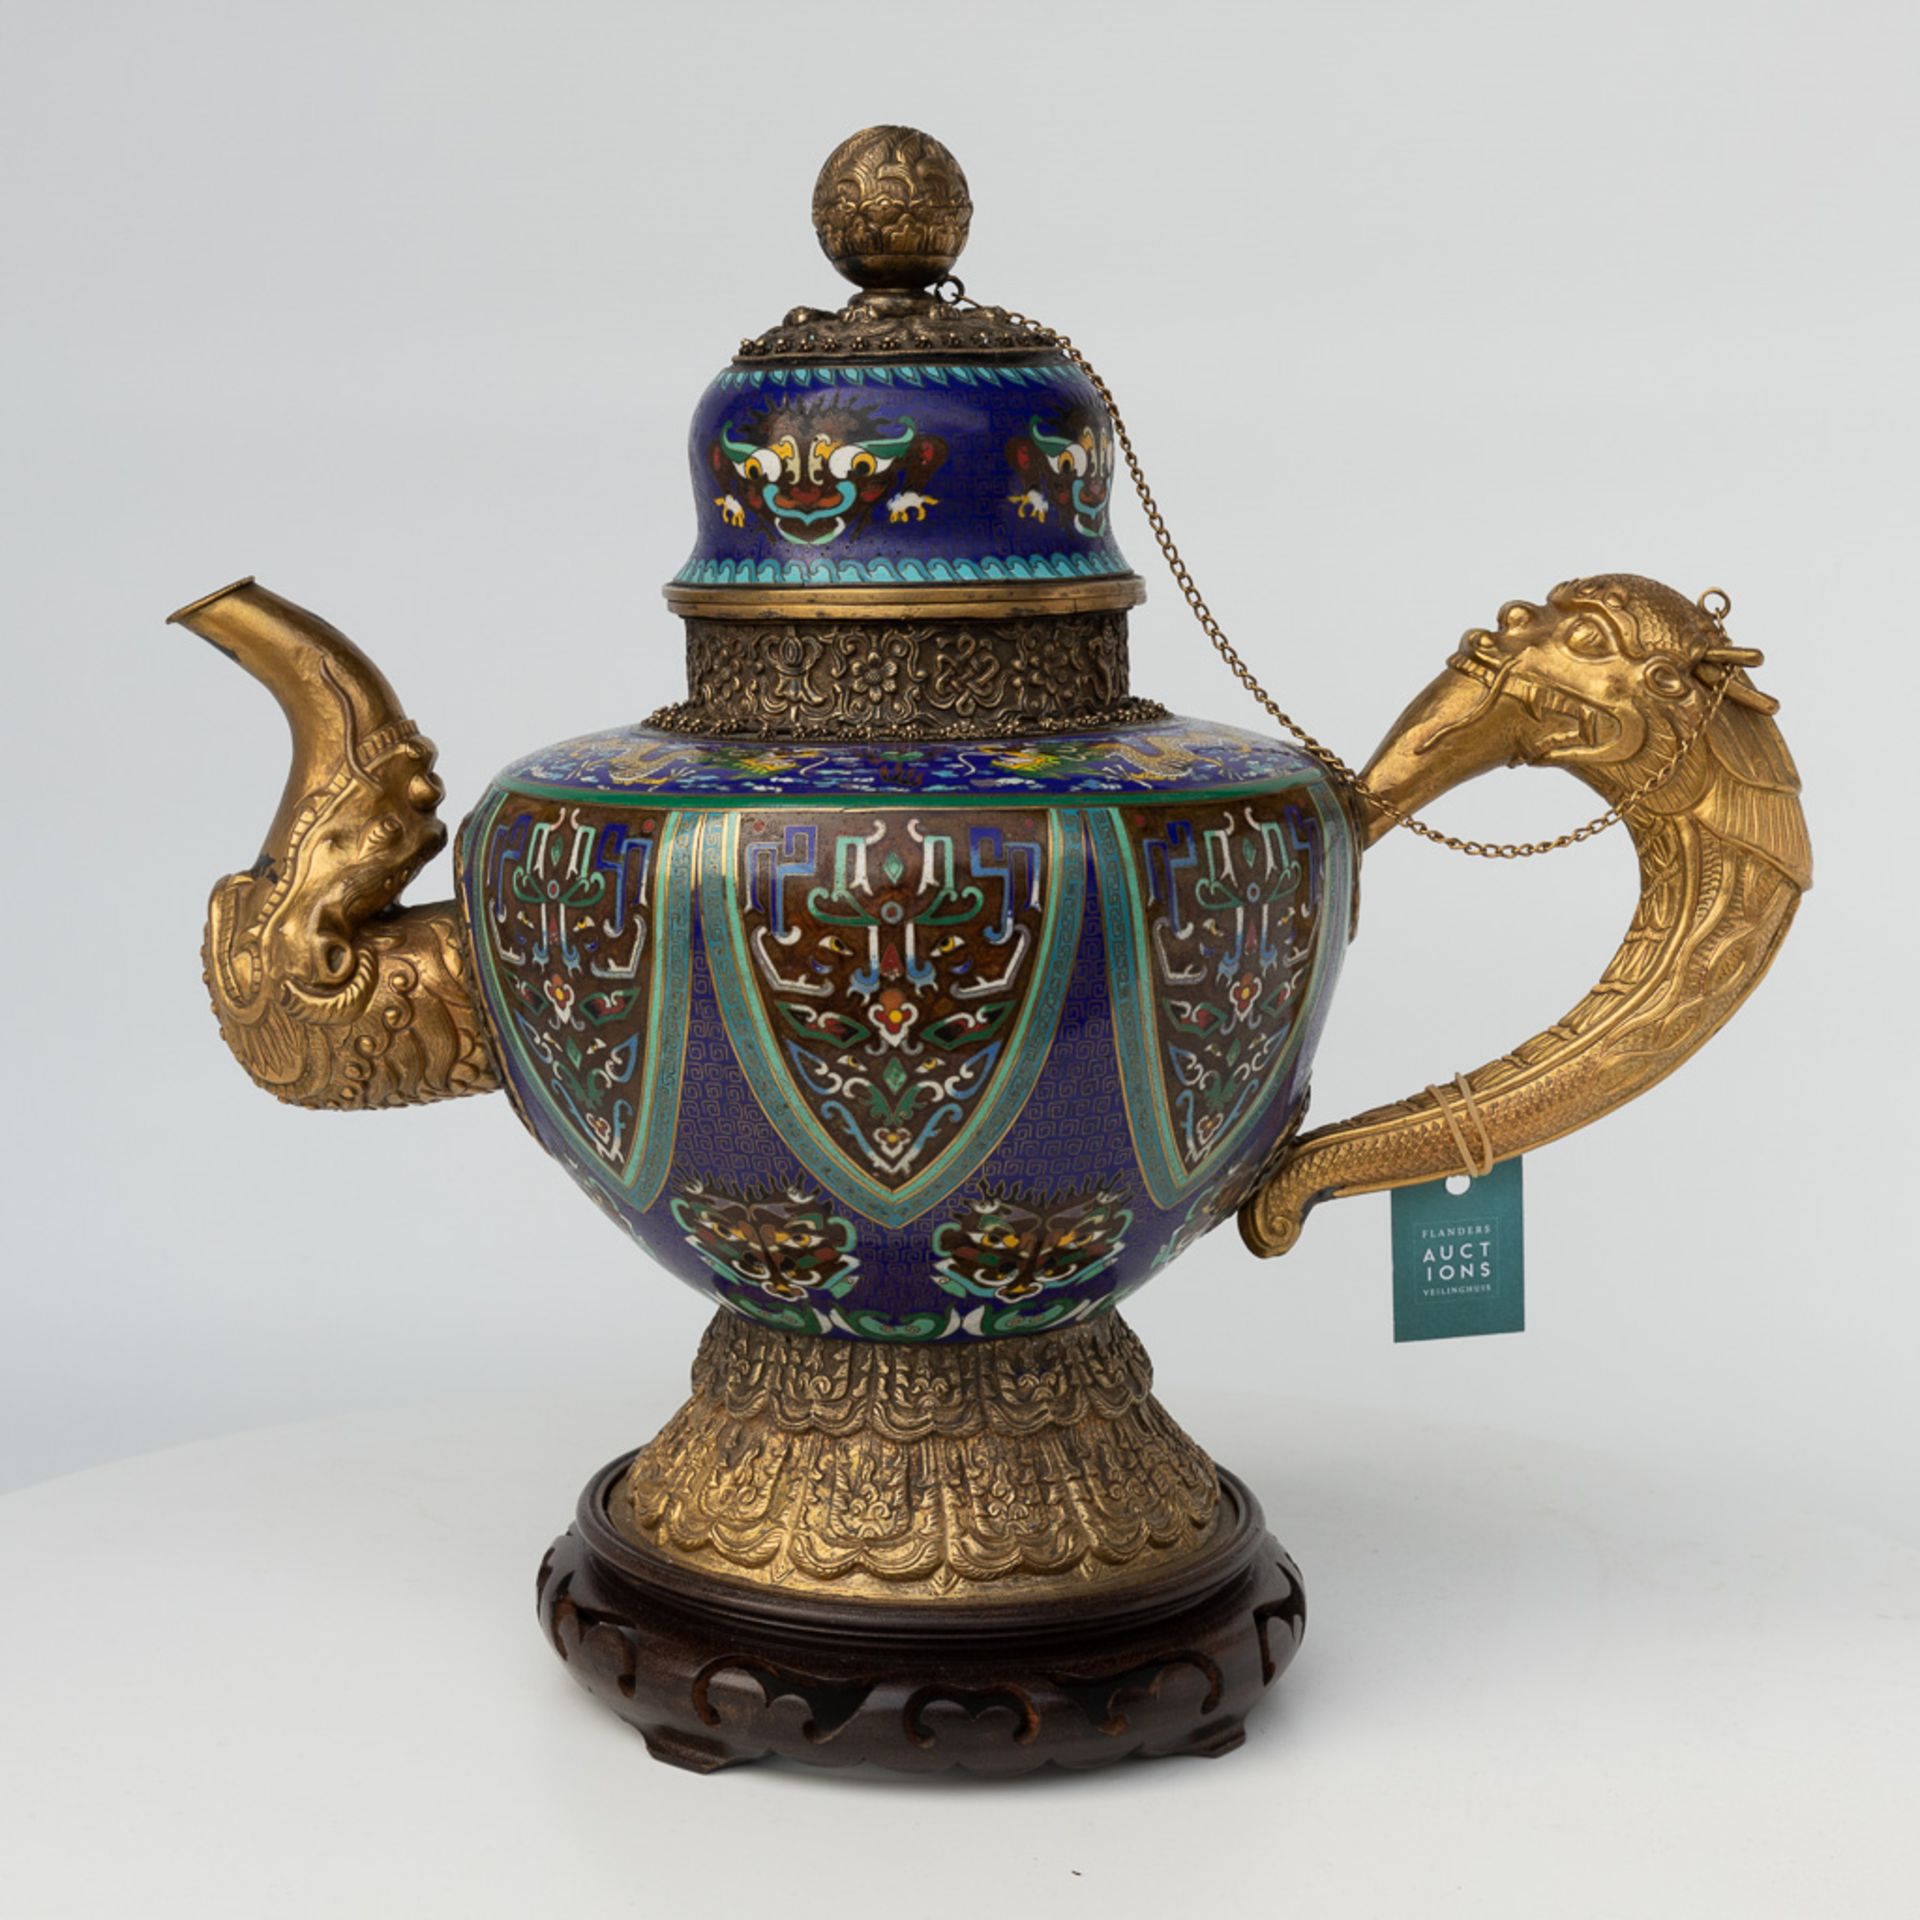 A Tibetan ceremonial ewer made of gilt bronze and finished with cloisonnŽ bronze. - Image 18 of 18